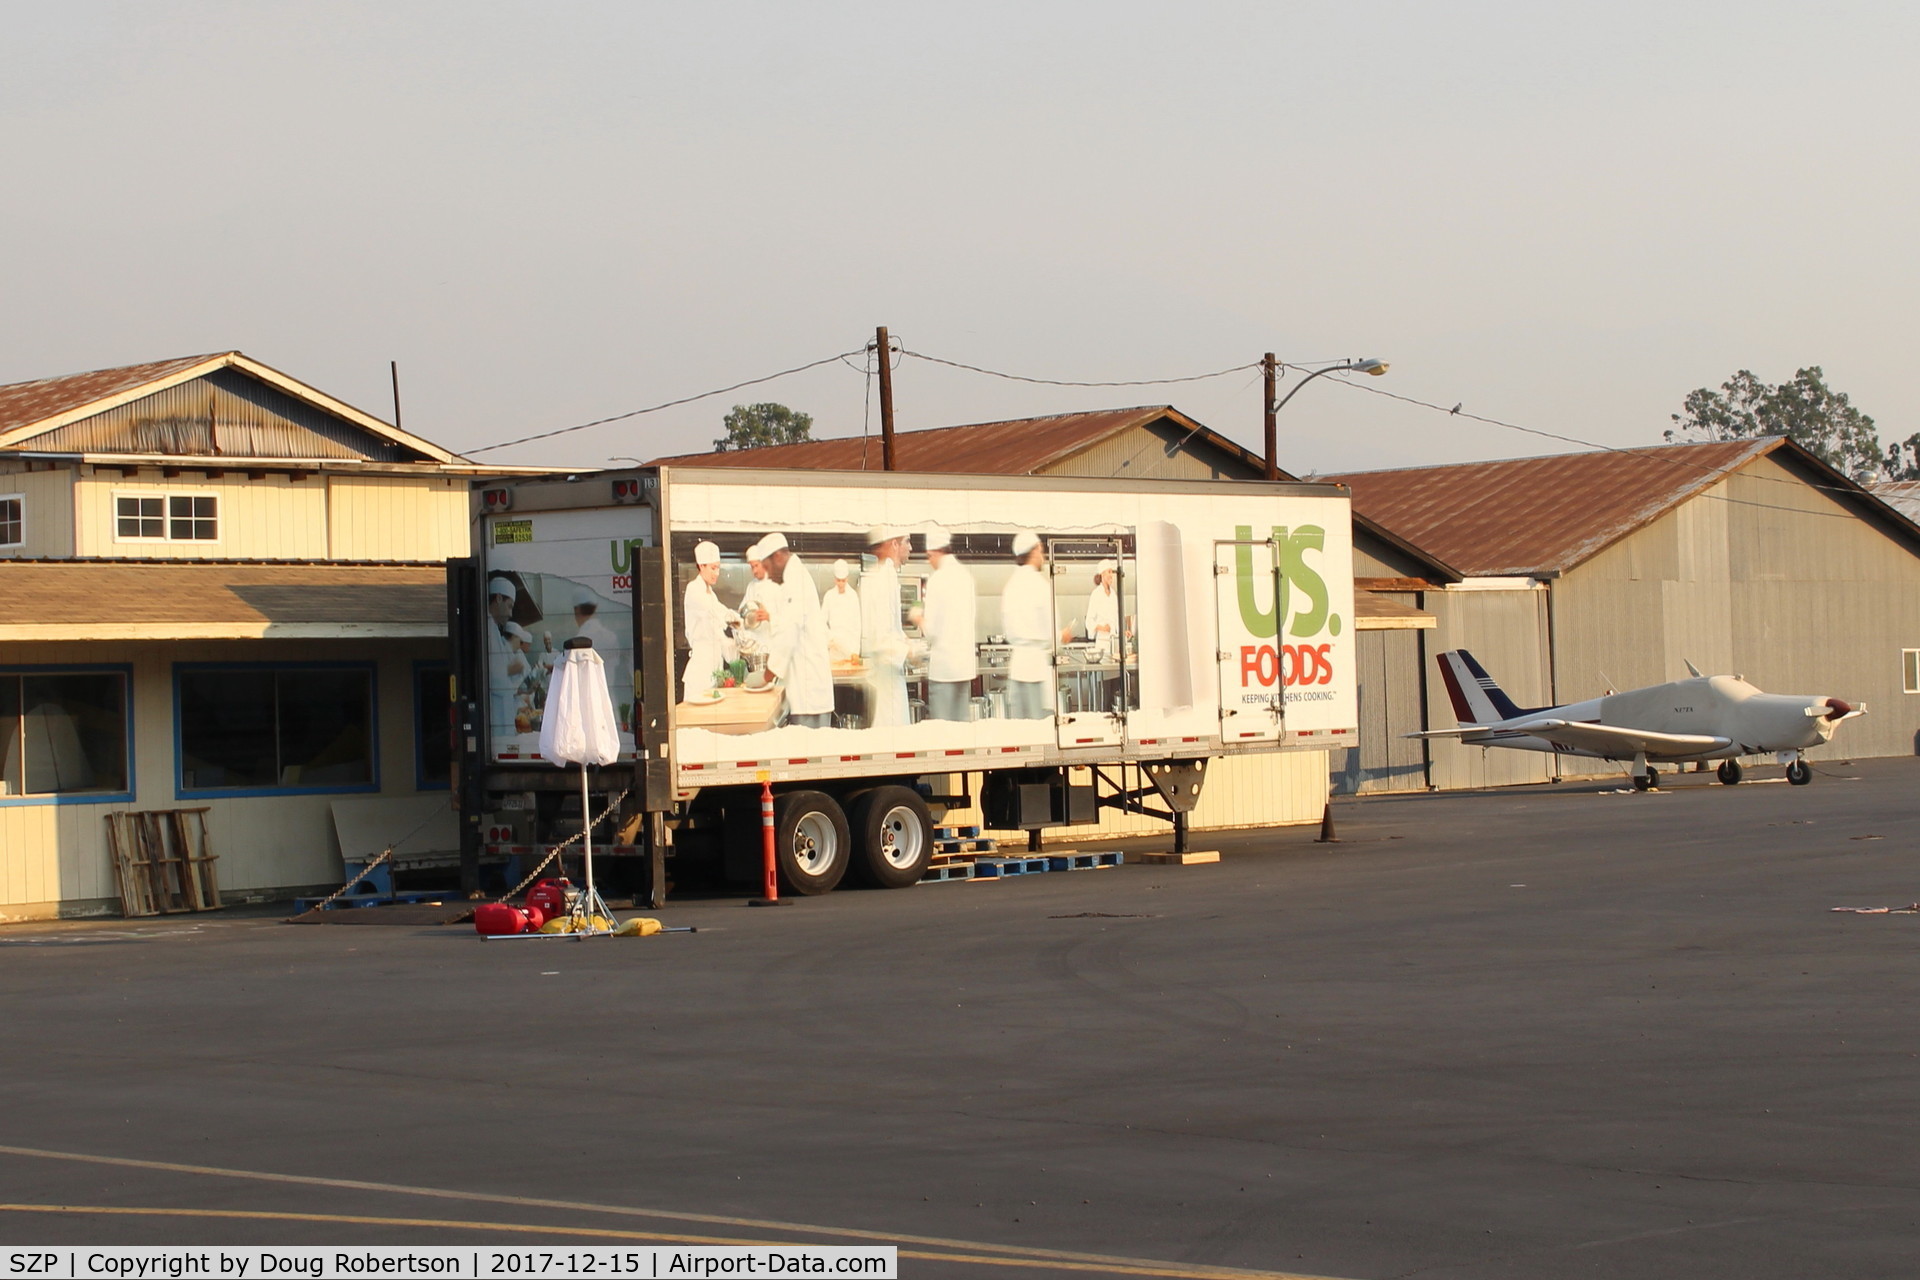 Santa Paula Airport (SZP) - Thomas Fire Airborne Firefighters need to be fed-this semi-trailer is the Food source. Smoky sky above and beyond.